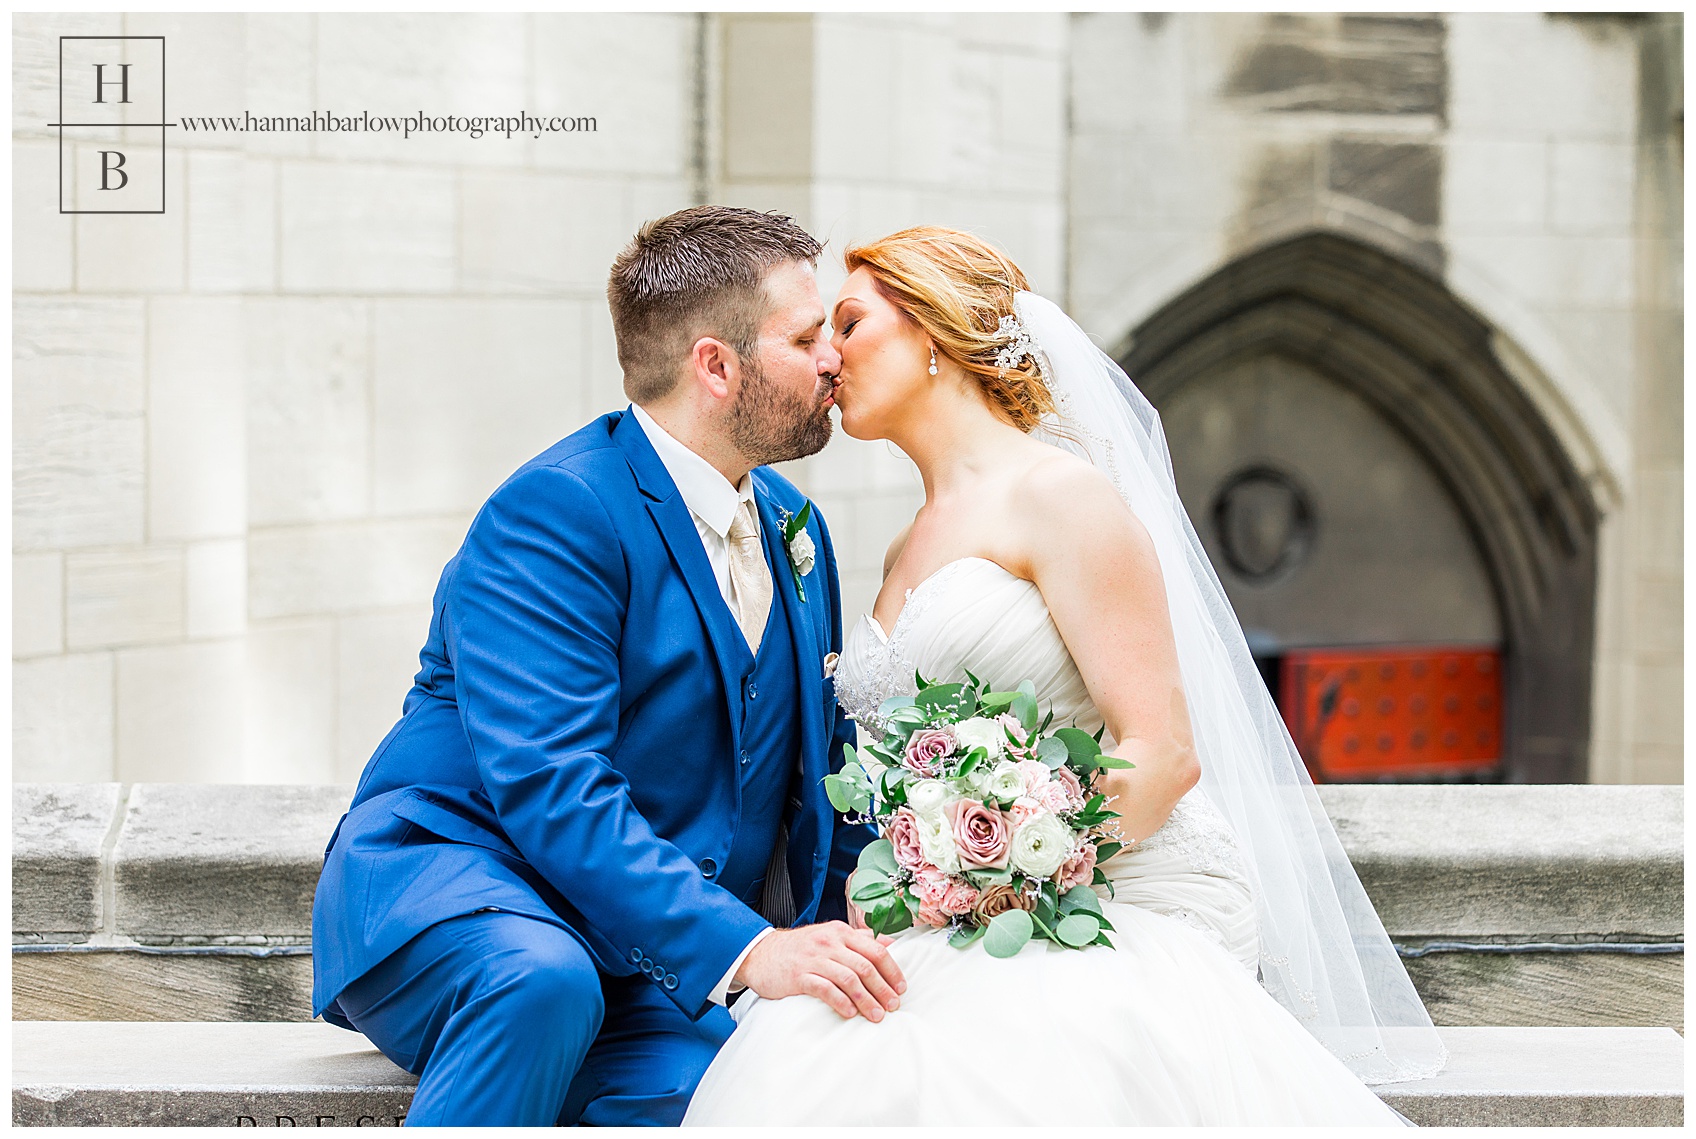 Cathedral of Learning Bride and Groom Kissing on Bench Photo